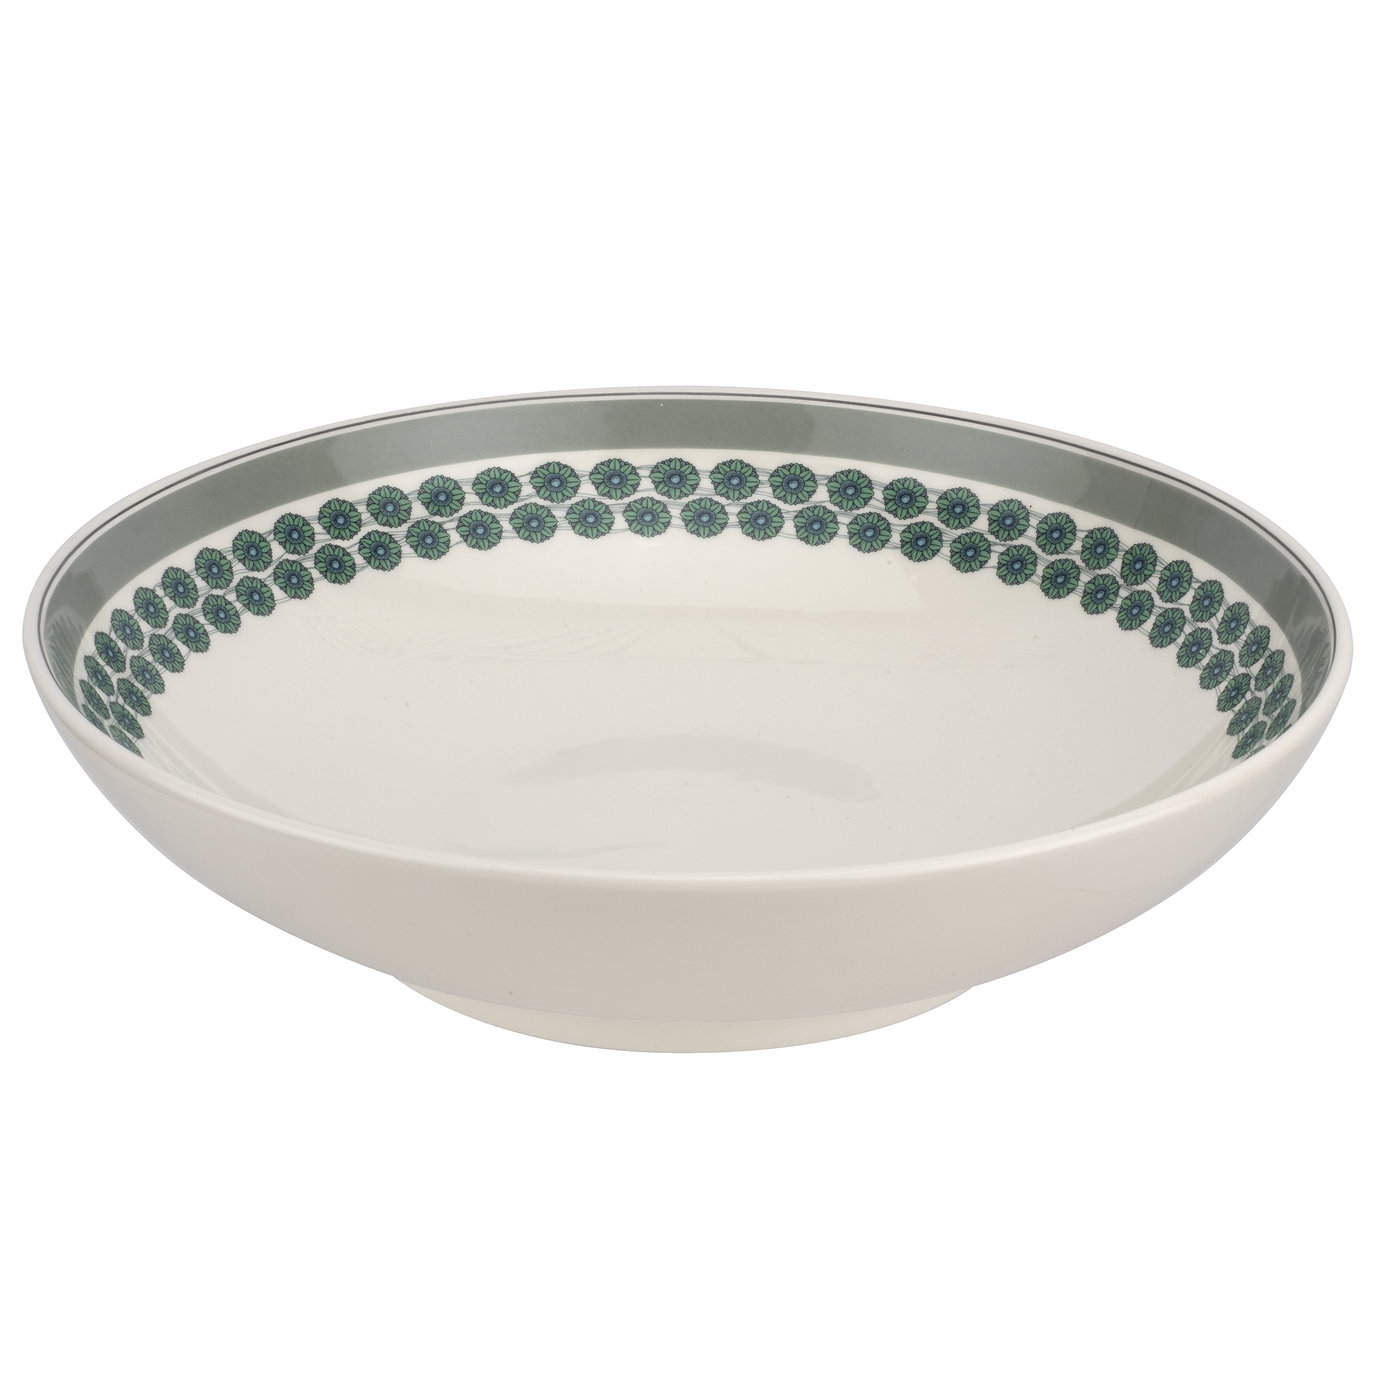 Westerly Grey 12.75 inch Low Bowl image number null